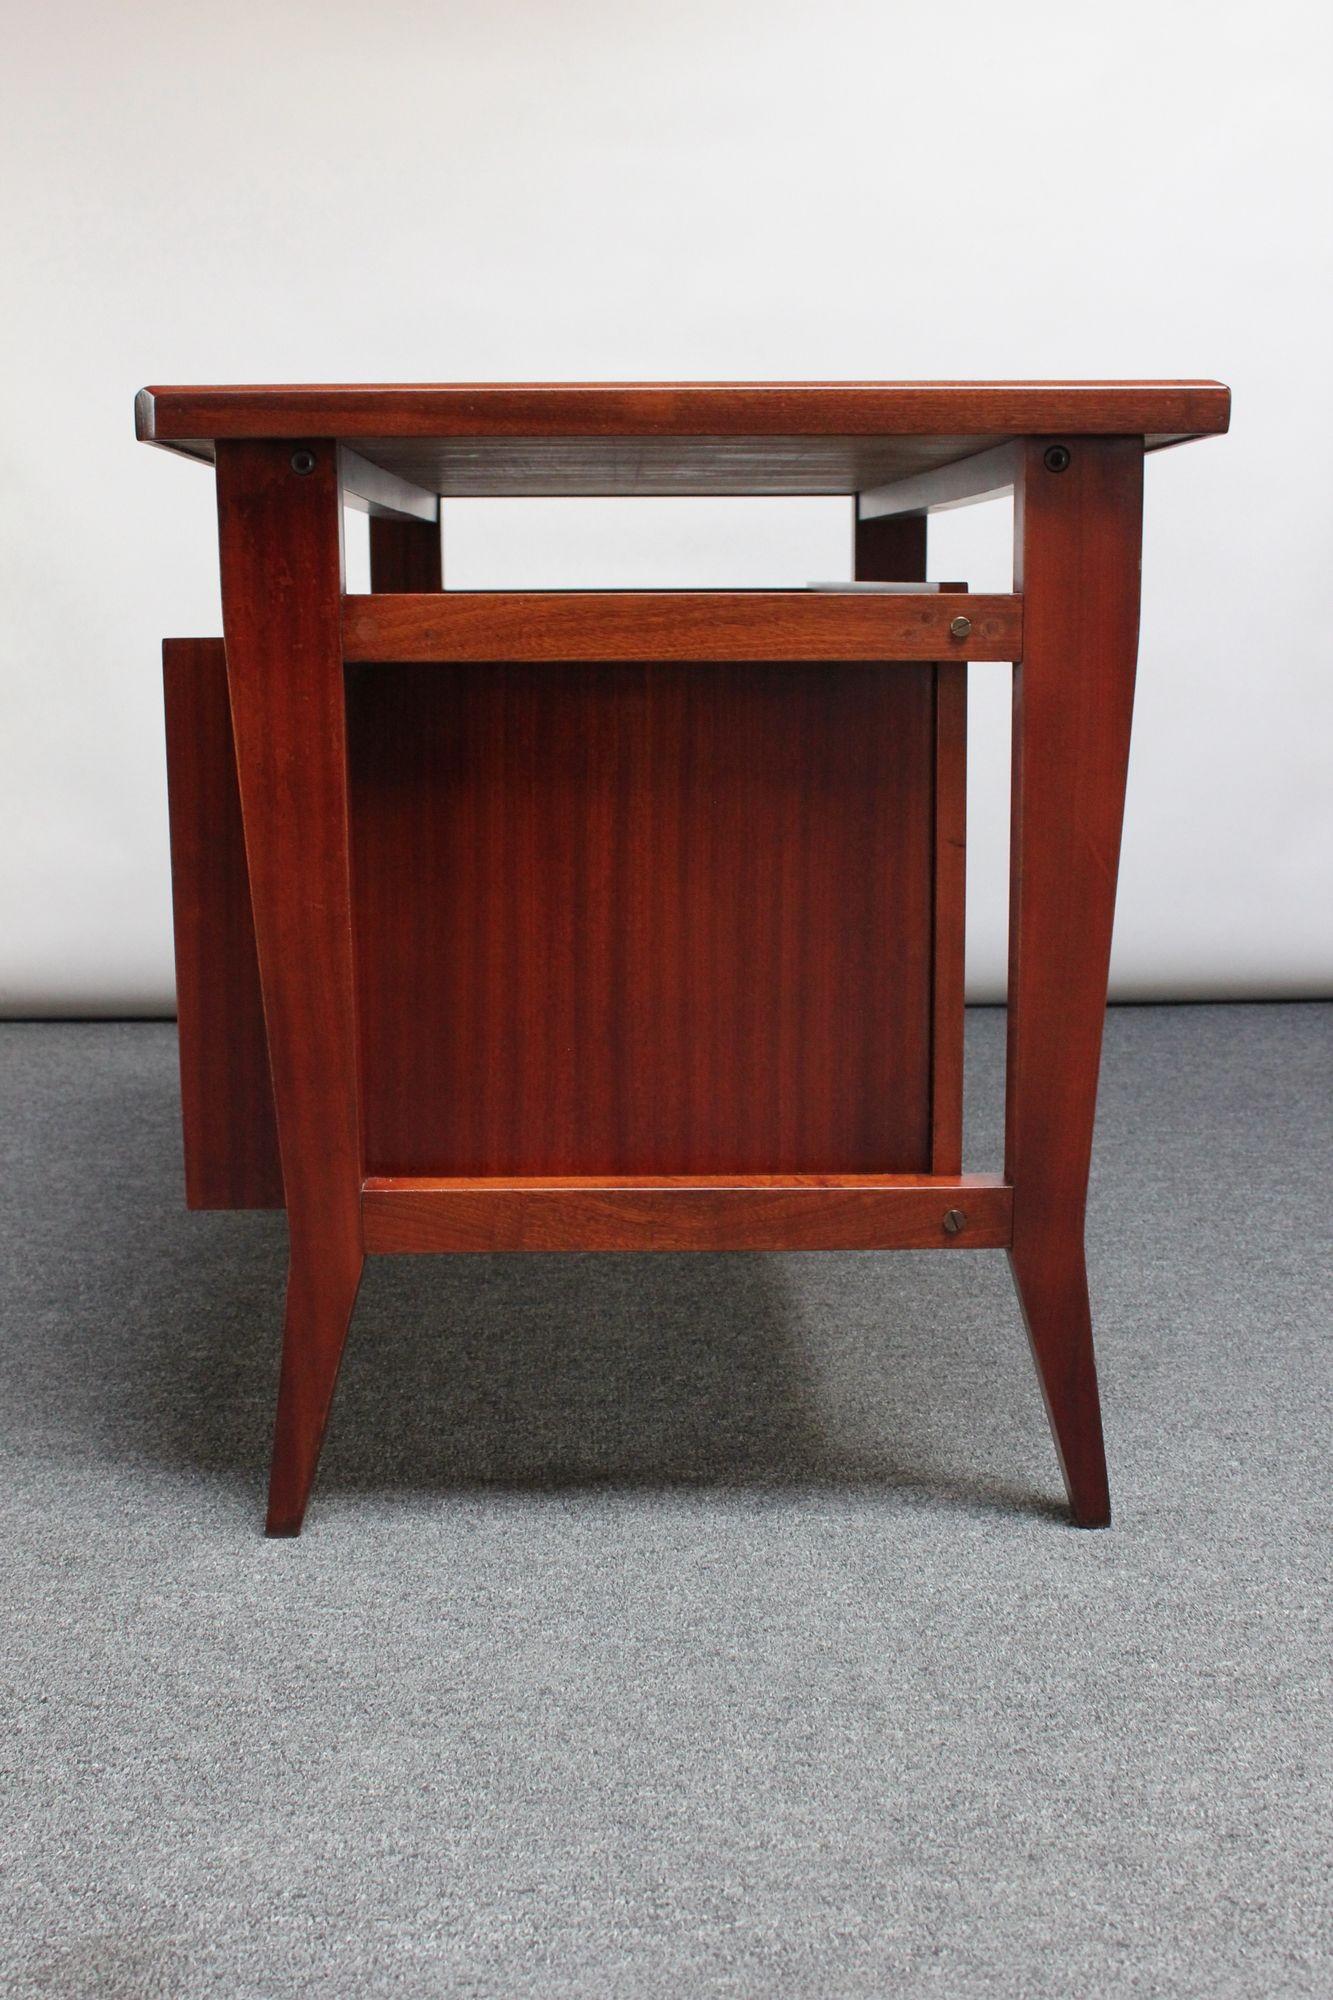 Mid-20th Century Petite Italian Modern Stained Mahogany Writing Desk by Gio Ponti for Schirolli For Sale